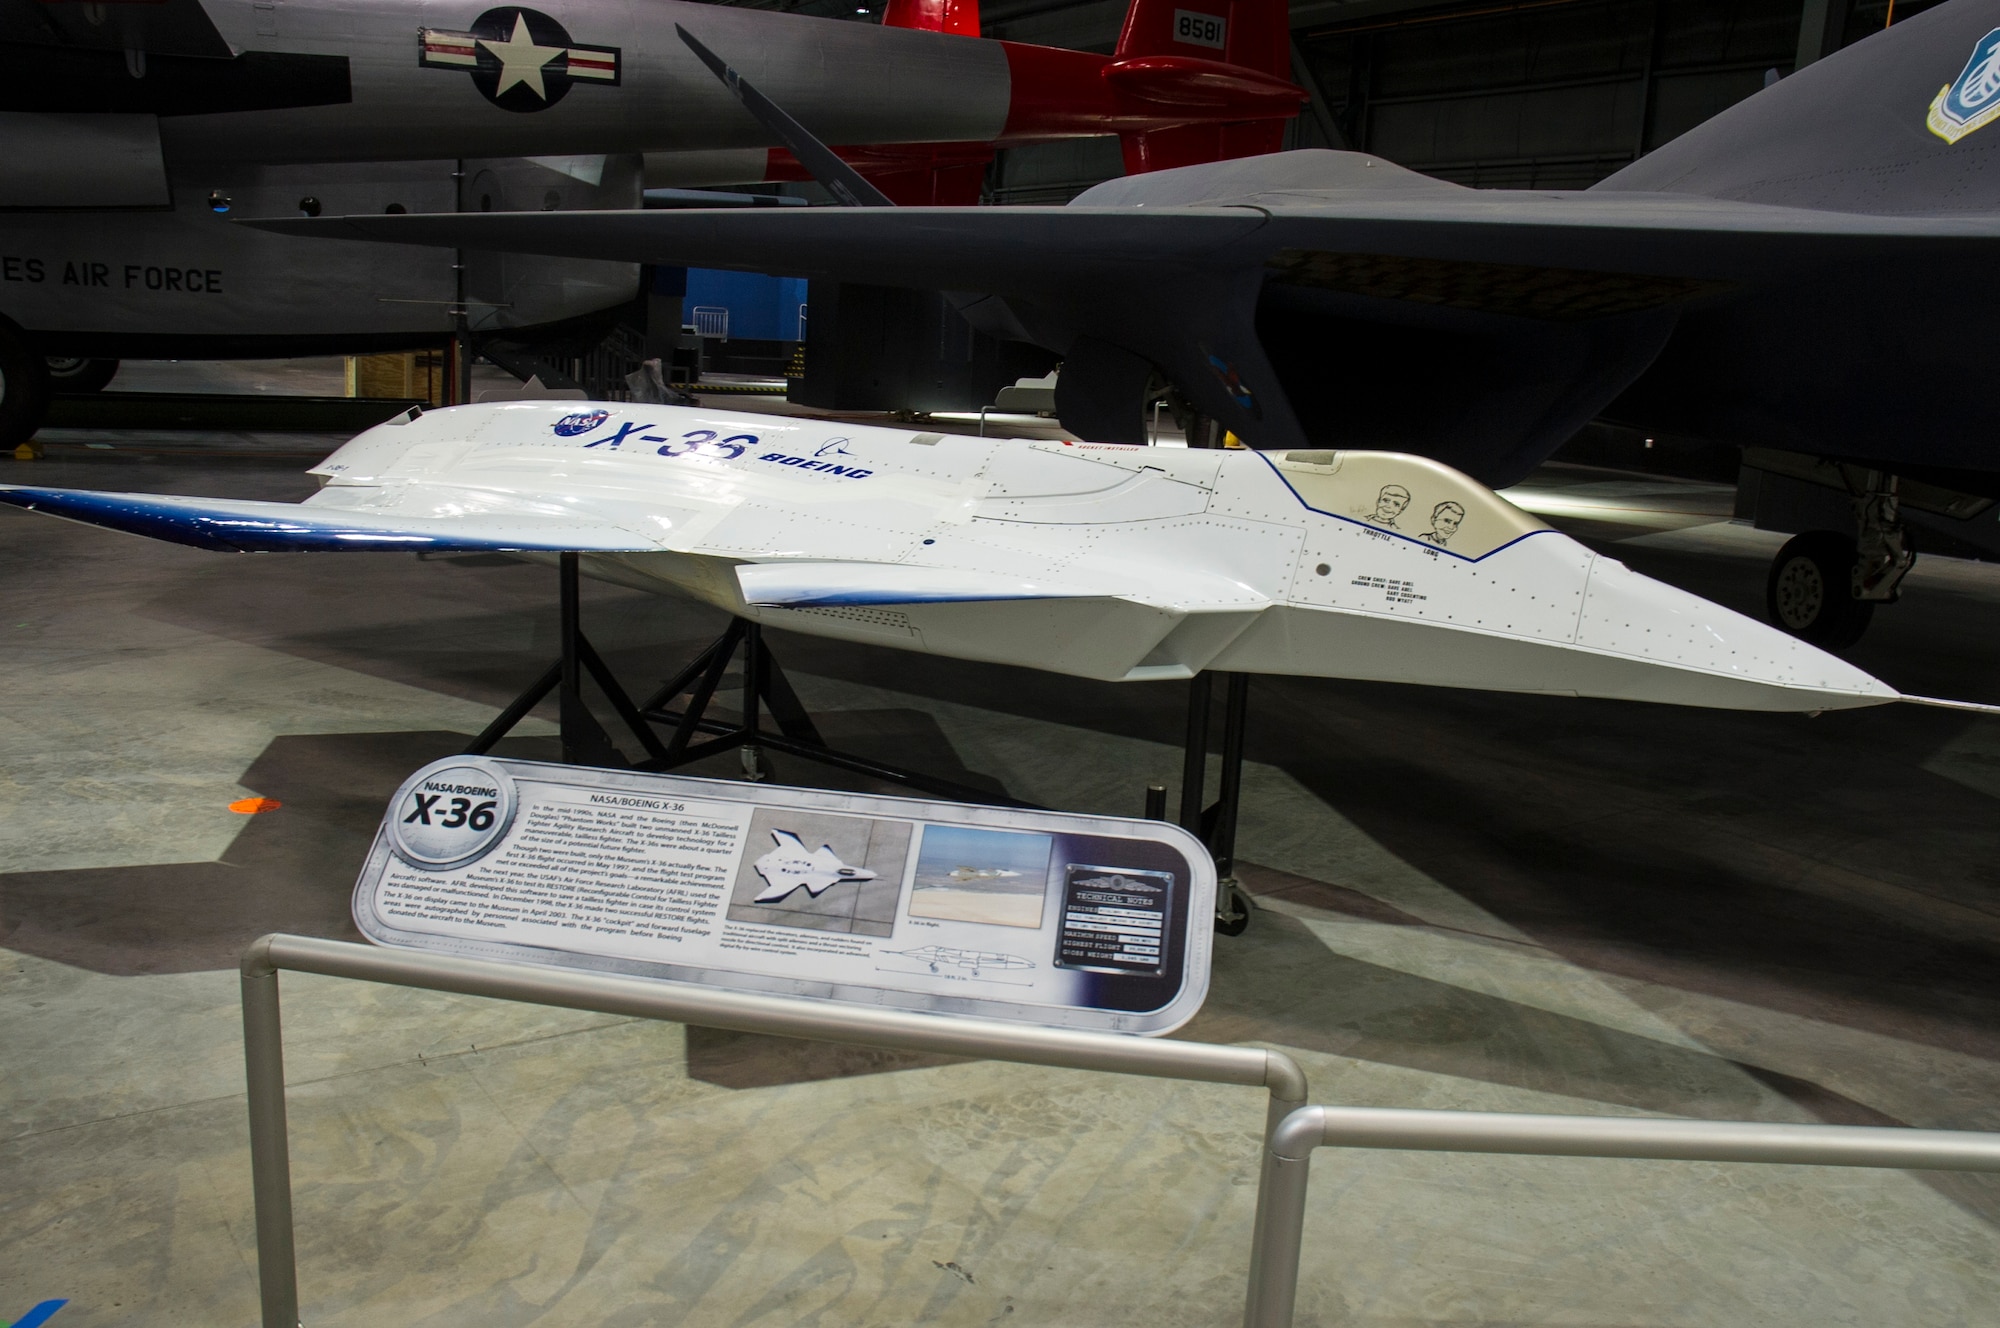 DAYTON, Ohio -- NASA/Boeing X-36 in the Research & Development Gallery at the National Museum of the U.S. Air Force. (U.S. Air Force photo by Ken LaRock)